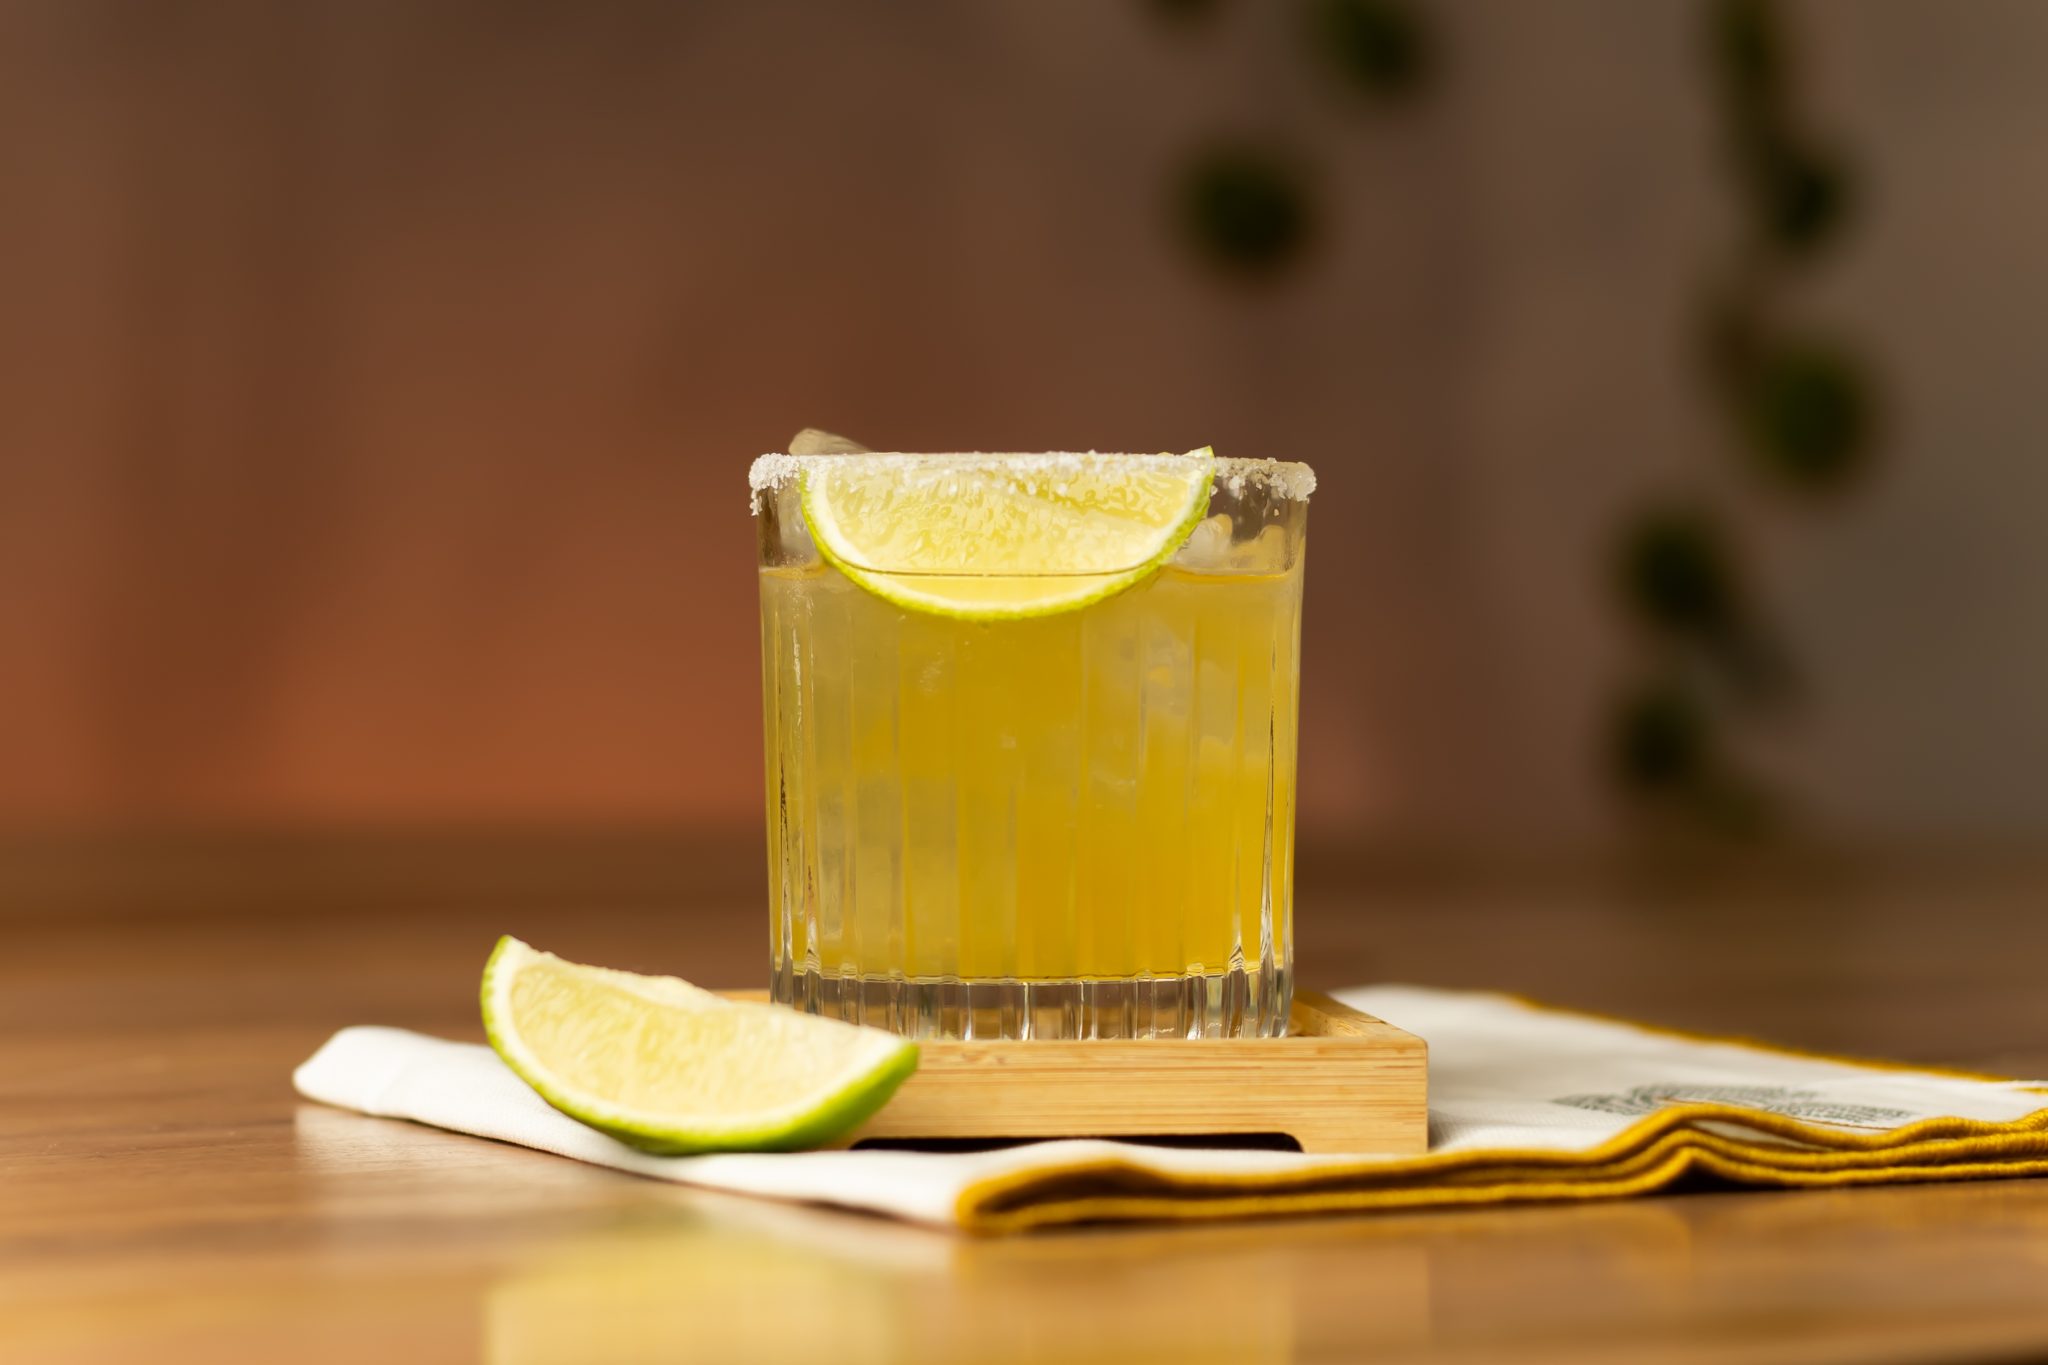 A side shot of a Skinny Margarita cocktail in a margarita glass on a wooden coaster placed on a green cloth surrounded by limes